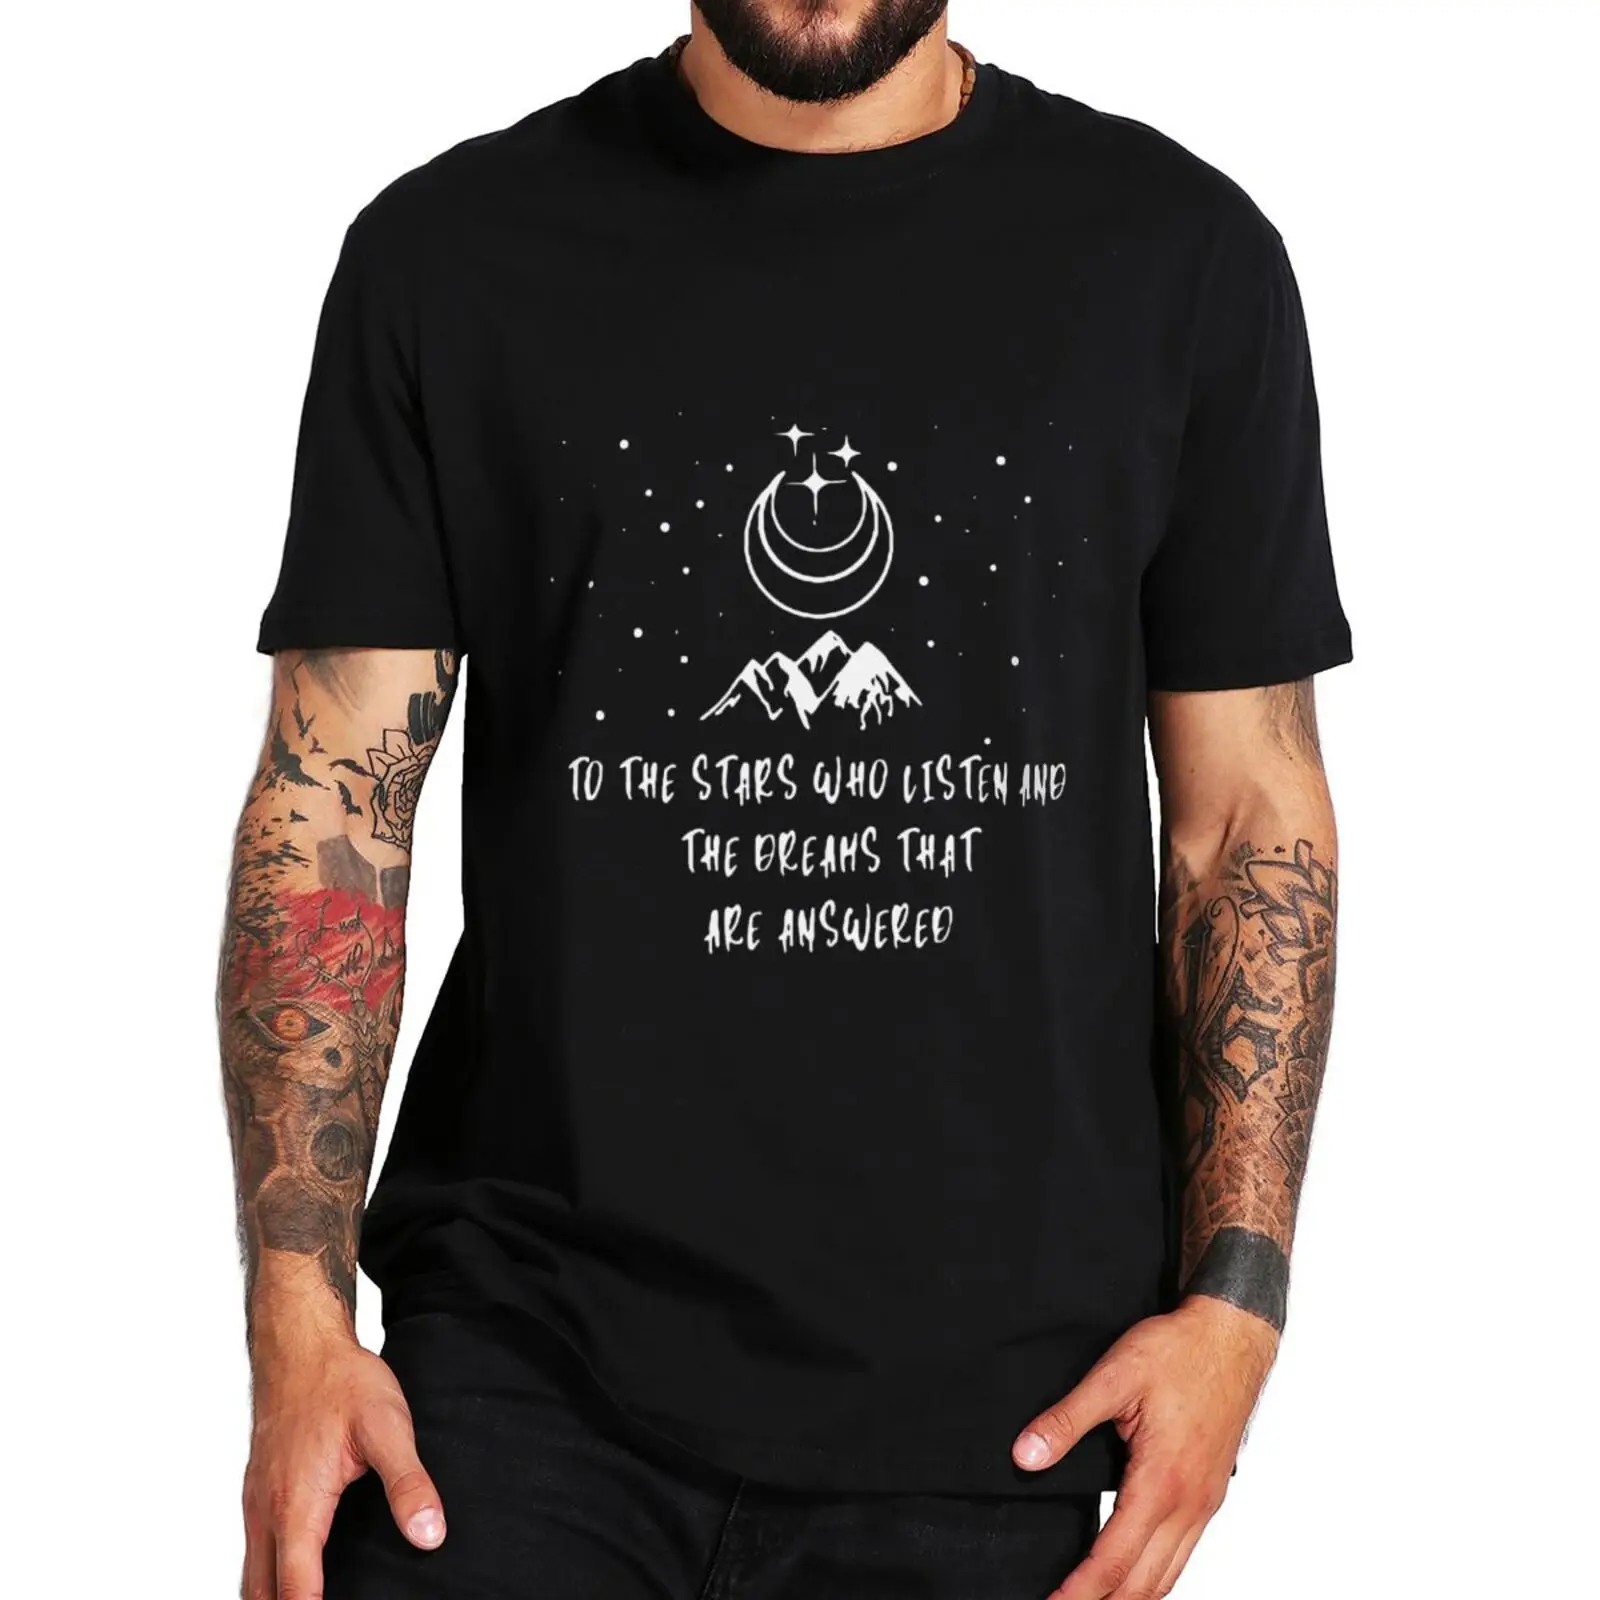 

Acotar Velaris T Shirt To The Stars Who Listen And The Dreams That Are Answer Fans Tshirt Unisex Cotton Casual Soft Tee Tops